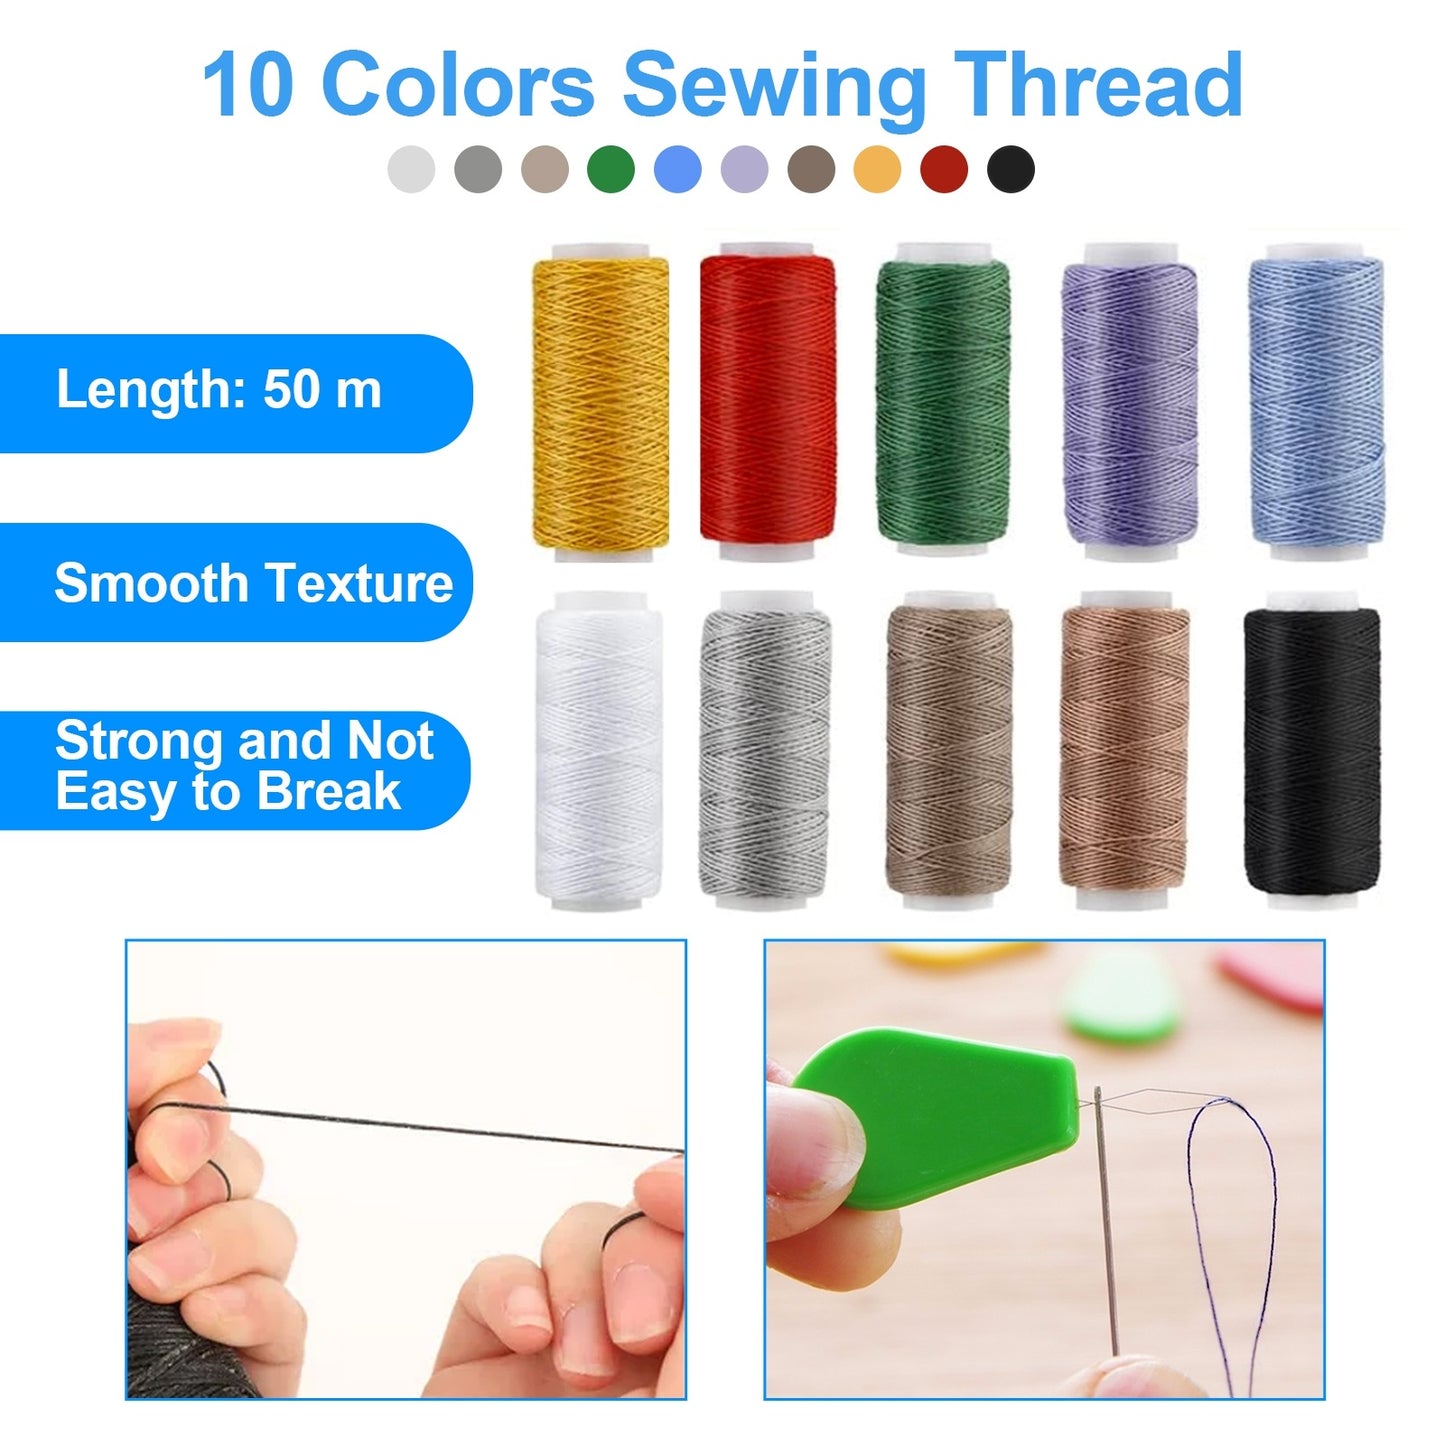 58 Pcs Leather Sewing Kit – Heavy Duty Hand Sewing, Upholstery Repair with Waxed Thread & Needles